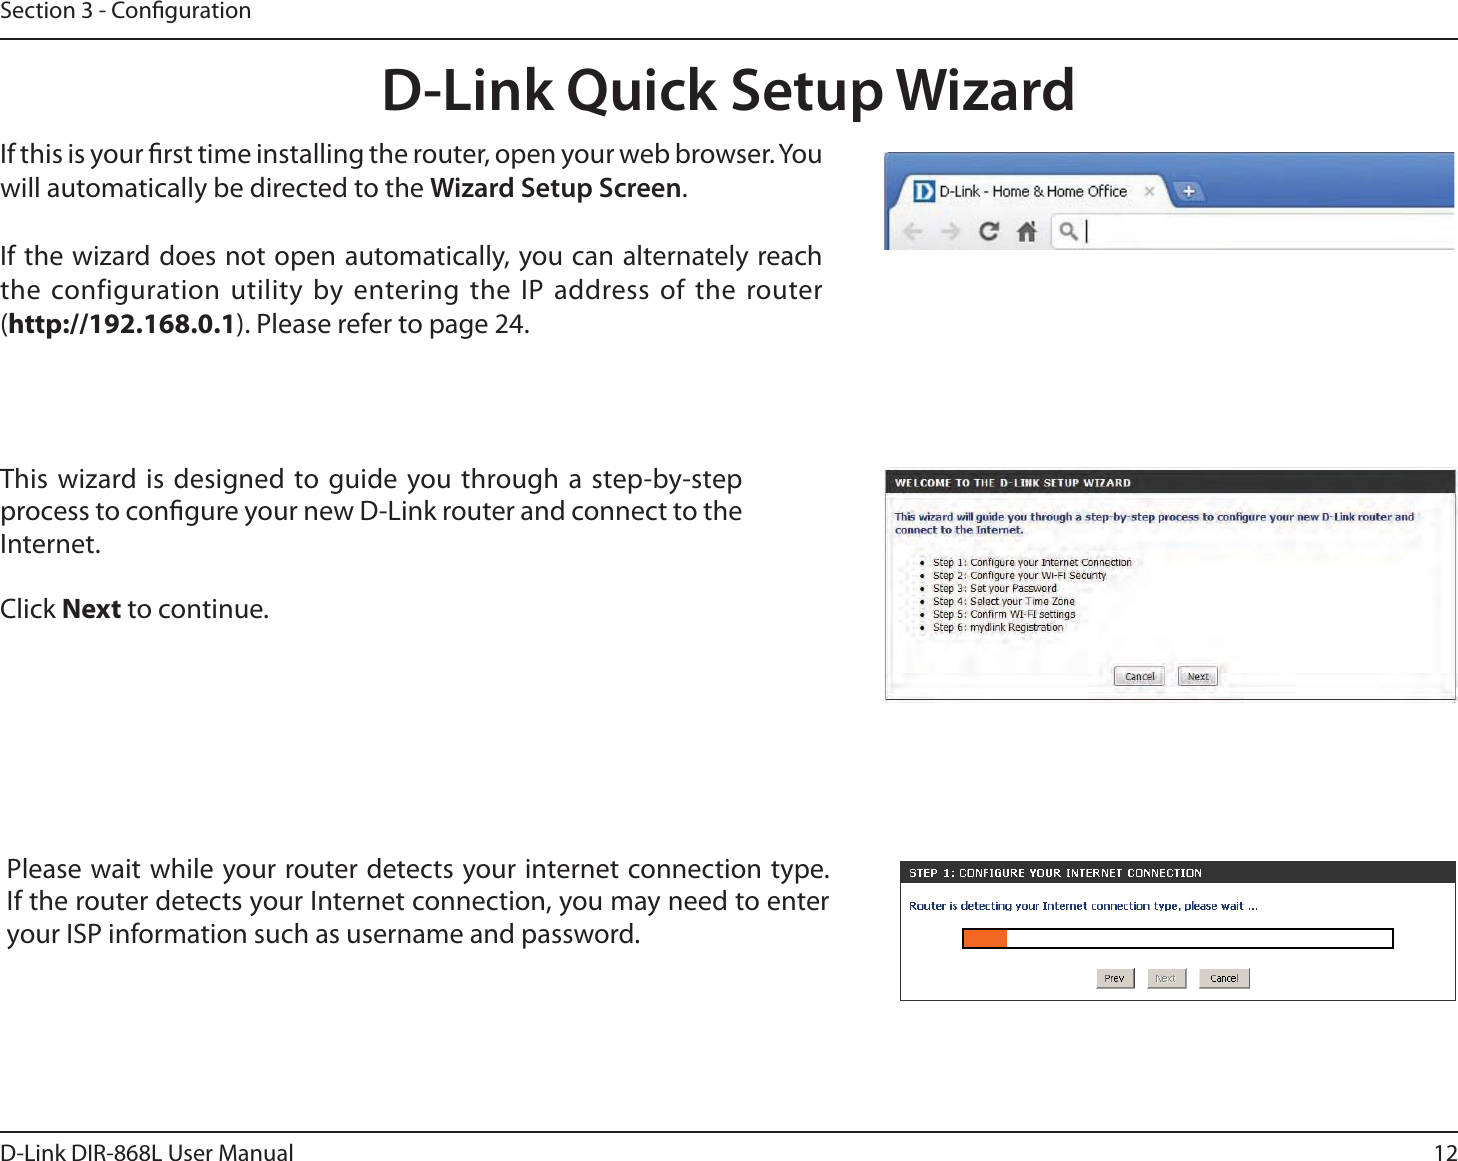 12D-Link DIR-868L User ManualSection 3 - CongurationThis wizard is designed to guide you through a step-by-step process to congure your new D-Link router and connect to the Internet.Click Next to continue. D-Link Quick Setup WizardIf this is your rst time installing the router, open your web browser. You will automatically be directed to the Wizard Setup Screen. If the wizard does not open automatically, you can alternately reach the configuration utility by entering the IP address of the router (http://192.168.0.1). Please refer to page 24.Please wait while your router detects your internet connection type. If the router detects your Internet connection, you may need to enter your ISP information such as username and password.